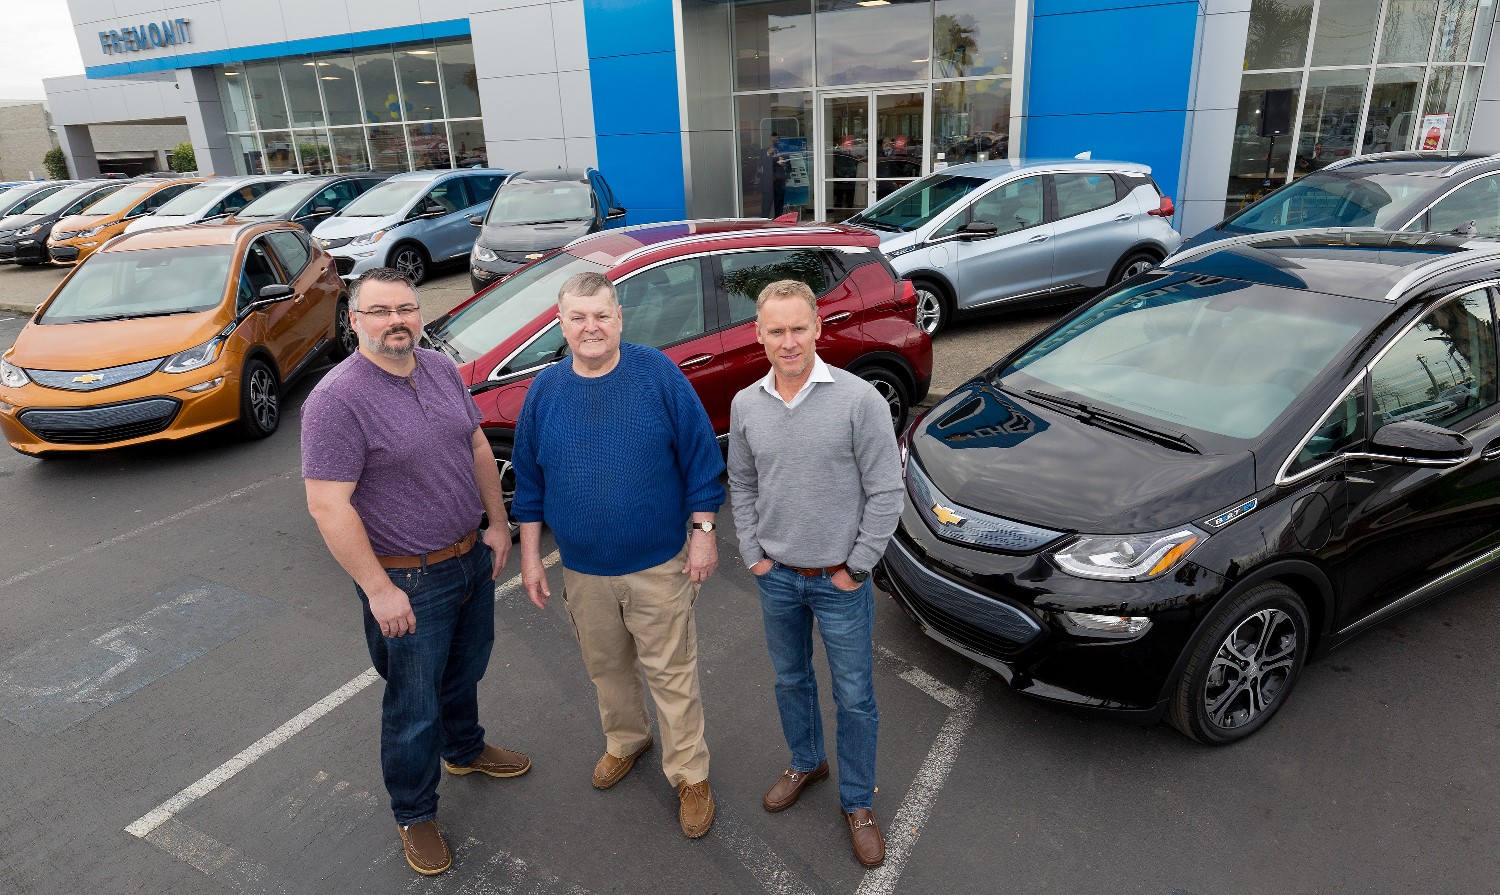 Customers Bobby Edmonds (l to r) of Castro Valley, CA, William 'Bill' Mattos of Fremont, CA, and Steve Henry of Portola Valley, CA take delivery of the first three 2017 Chevrolet Bolt EVs Tuesday, December 13, 2016 at Fremont Chevrolet in Fremont, CA. The all-electric Bolt EV offers an EPA-estimated 238 miles of range on a full charge.